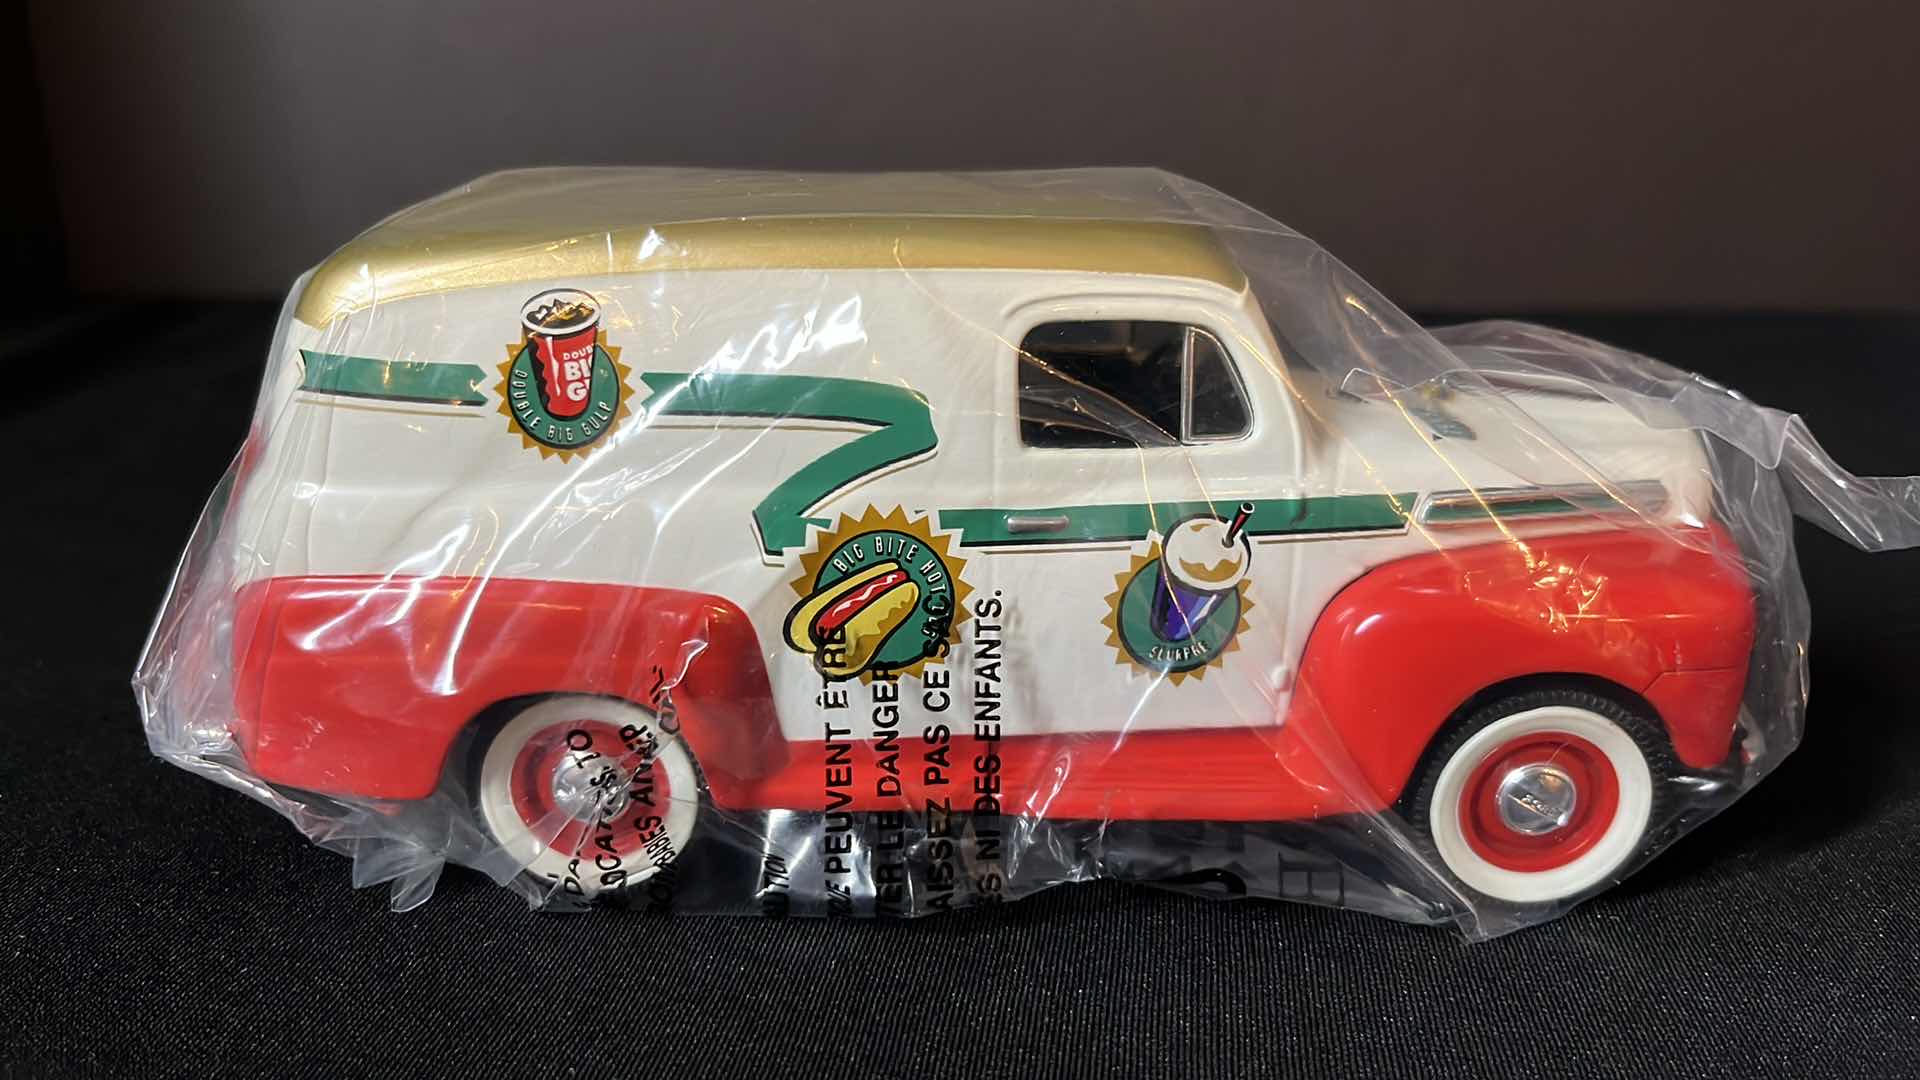 Photo 4 of VINTAGE FORD MOTOR COMPANY 7 ELEVEN 1948 FORD PANEL VAN COIN BANK (STOCK #68036)